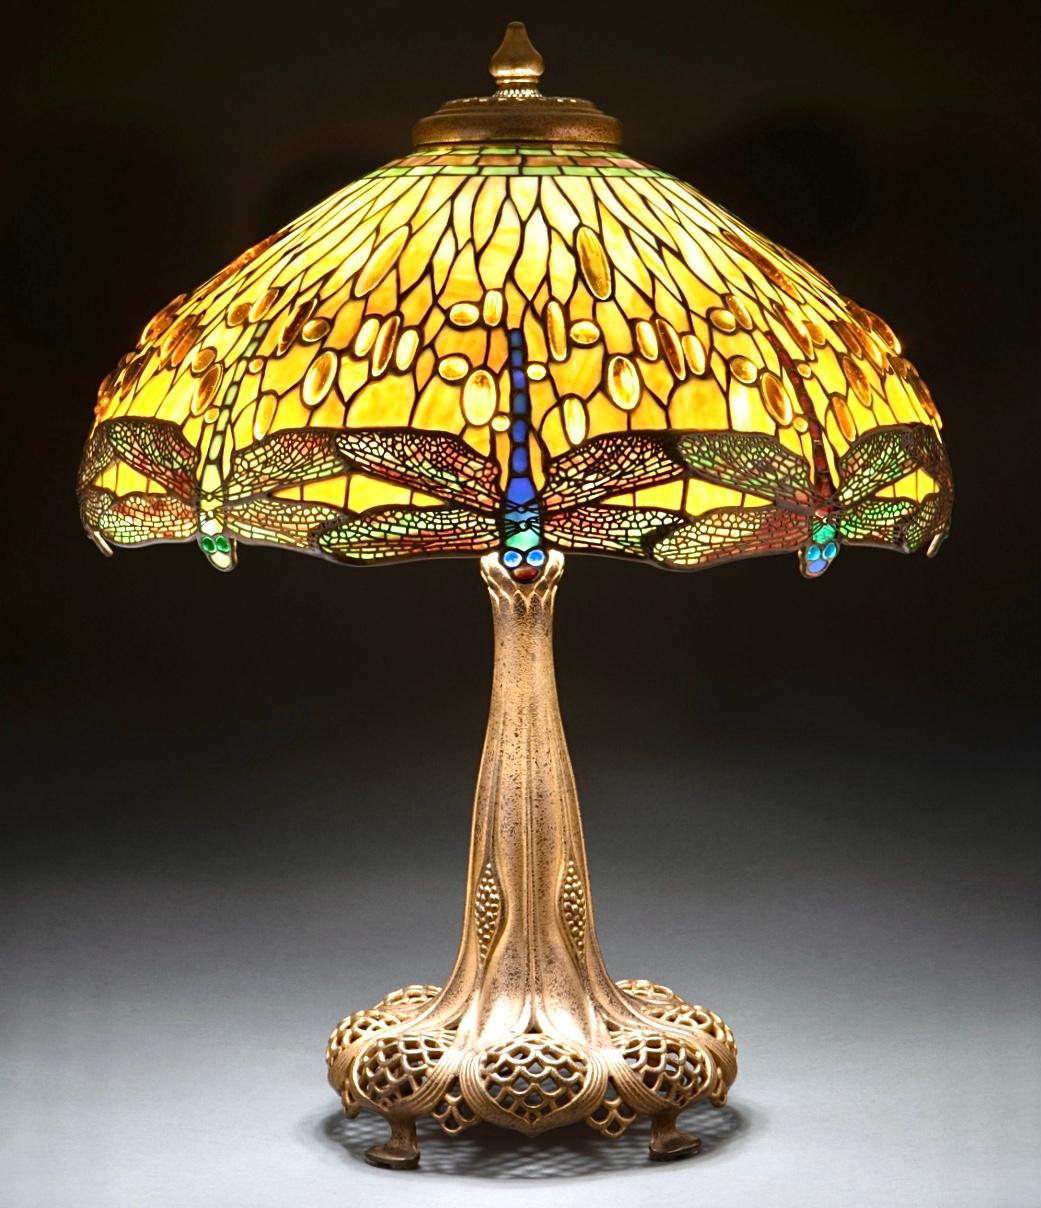 Tiffany Studios Leaded Glass and Gilt Bronze Jeweled Drophead Dragonfly Table Lamp, circa 1910. 

At the turn of the century, Clara Driscoll, head of the women’s glass cutting department and the brains behind some of Tiffany’s most iconic shades